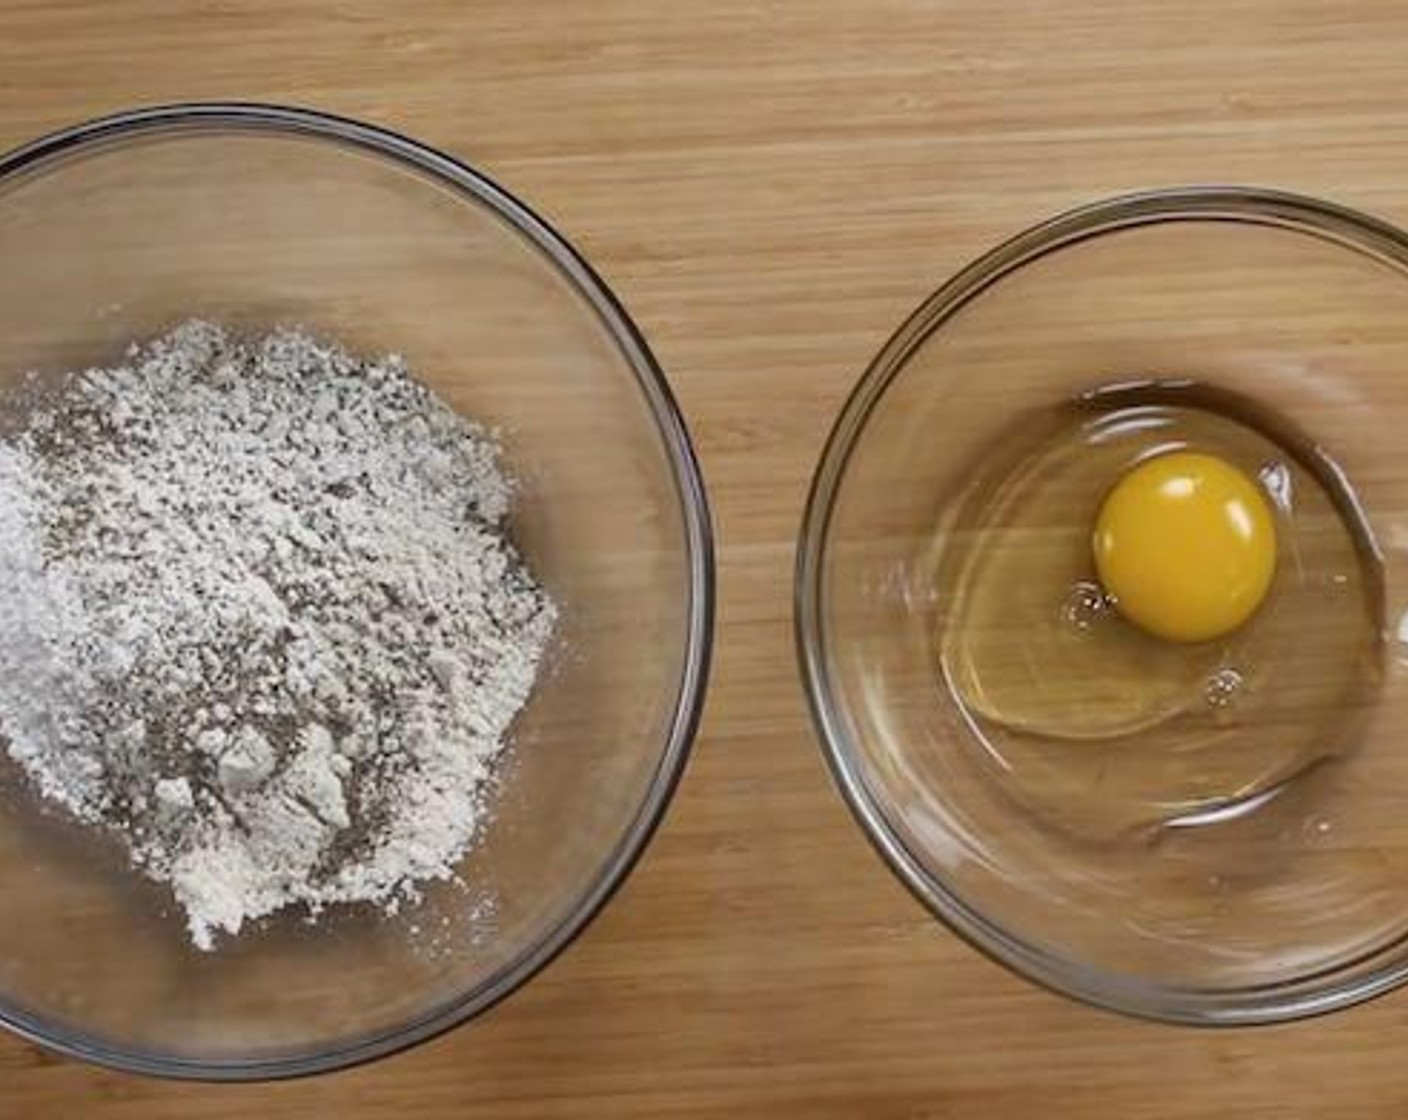 step 3 Place the Egg (1) in one bowl, and in another bowl, mix All-Purpose Flour (1/4 cup), Corn Flour (1/2 cup), Salt (1/2 tsp) and Ground Black Pepper (1 pinch).